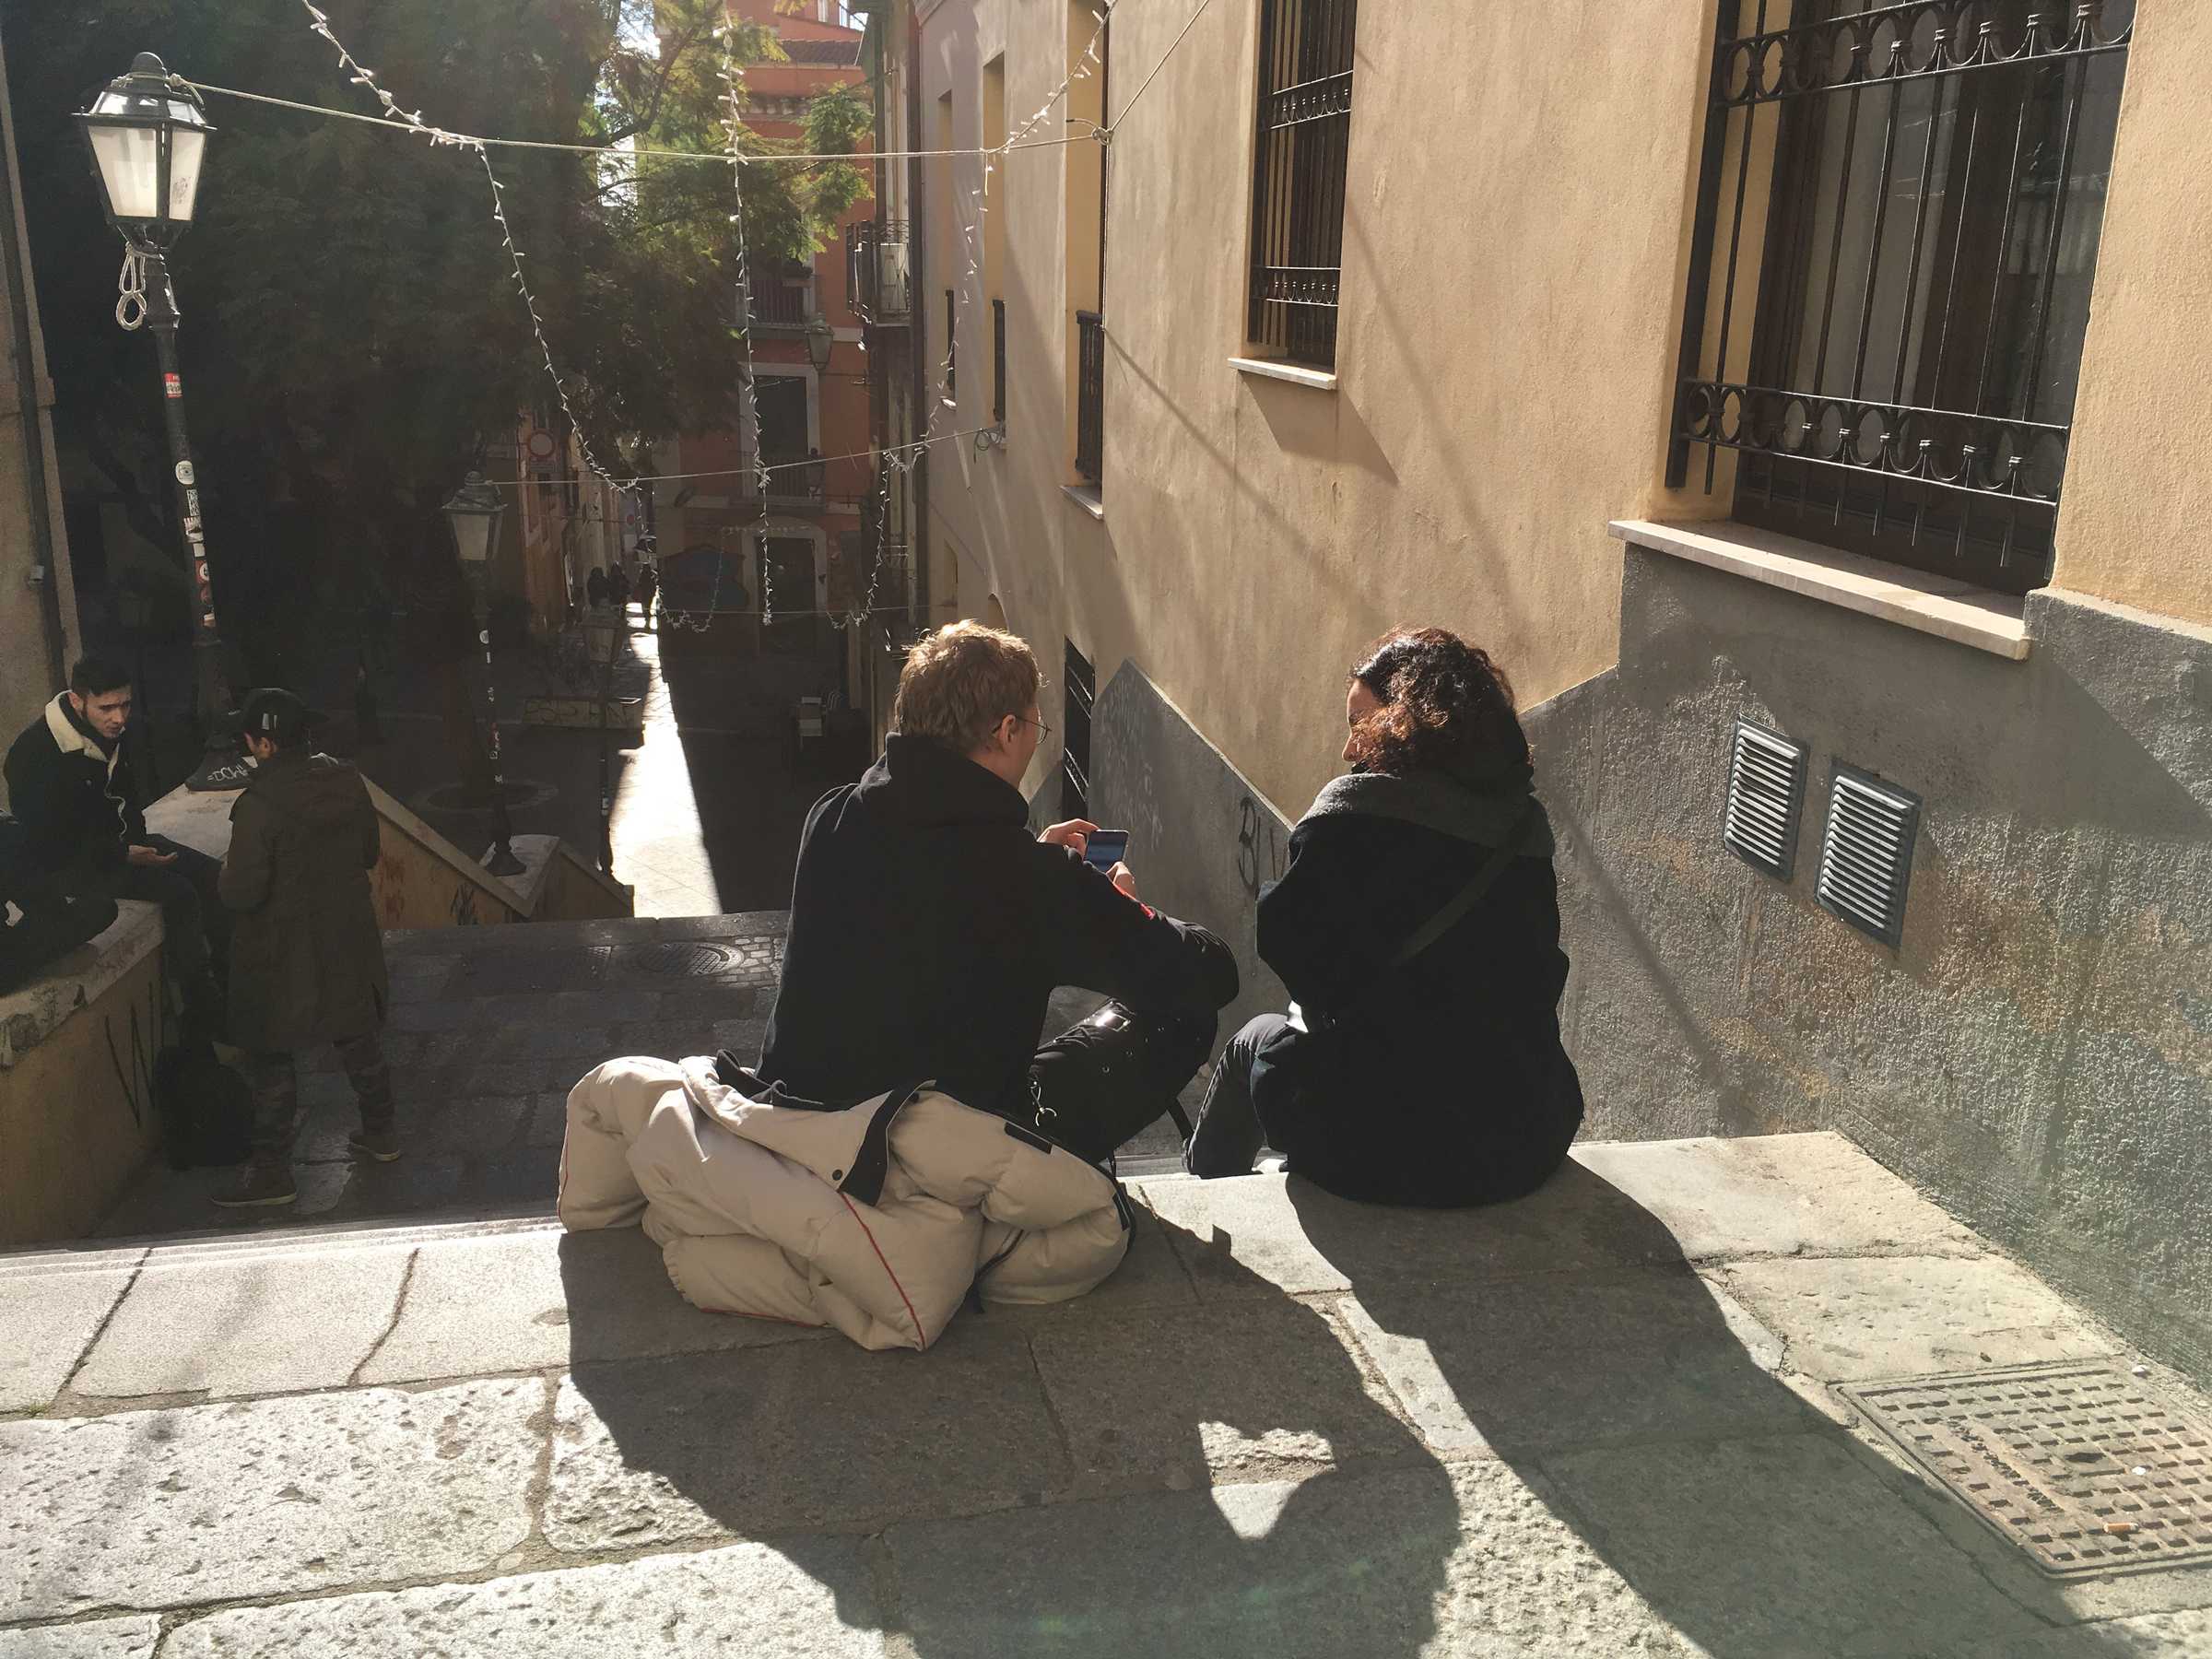 How To Do things With Theory ~ face to face meeting Ghalya Saadawi and Nilz Källgren, in the streets of Cagliari. DAI week 4, January 2019. Photo: Jacq van der Spek.